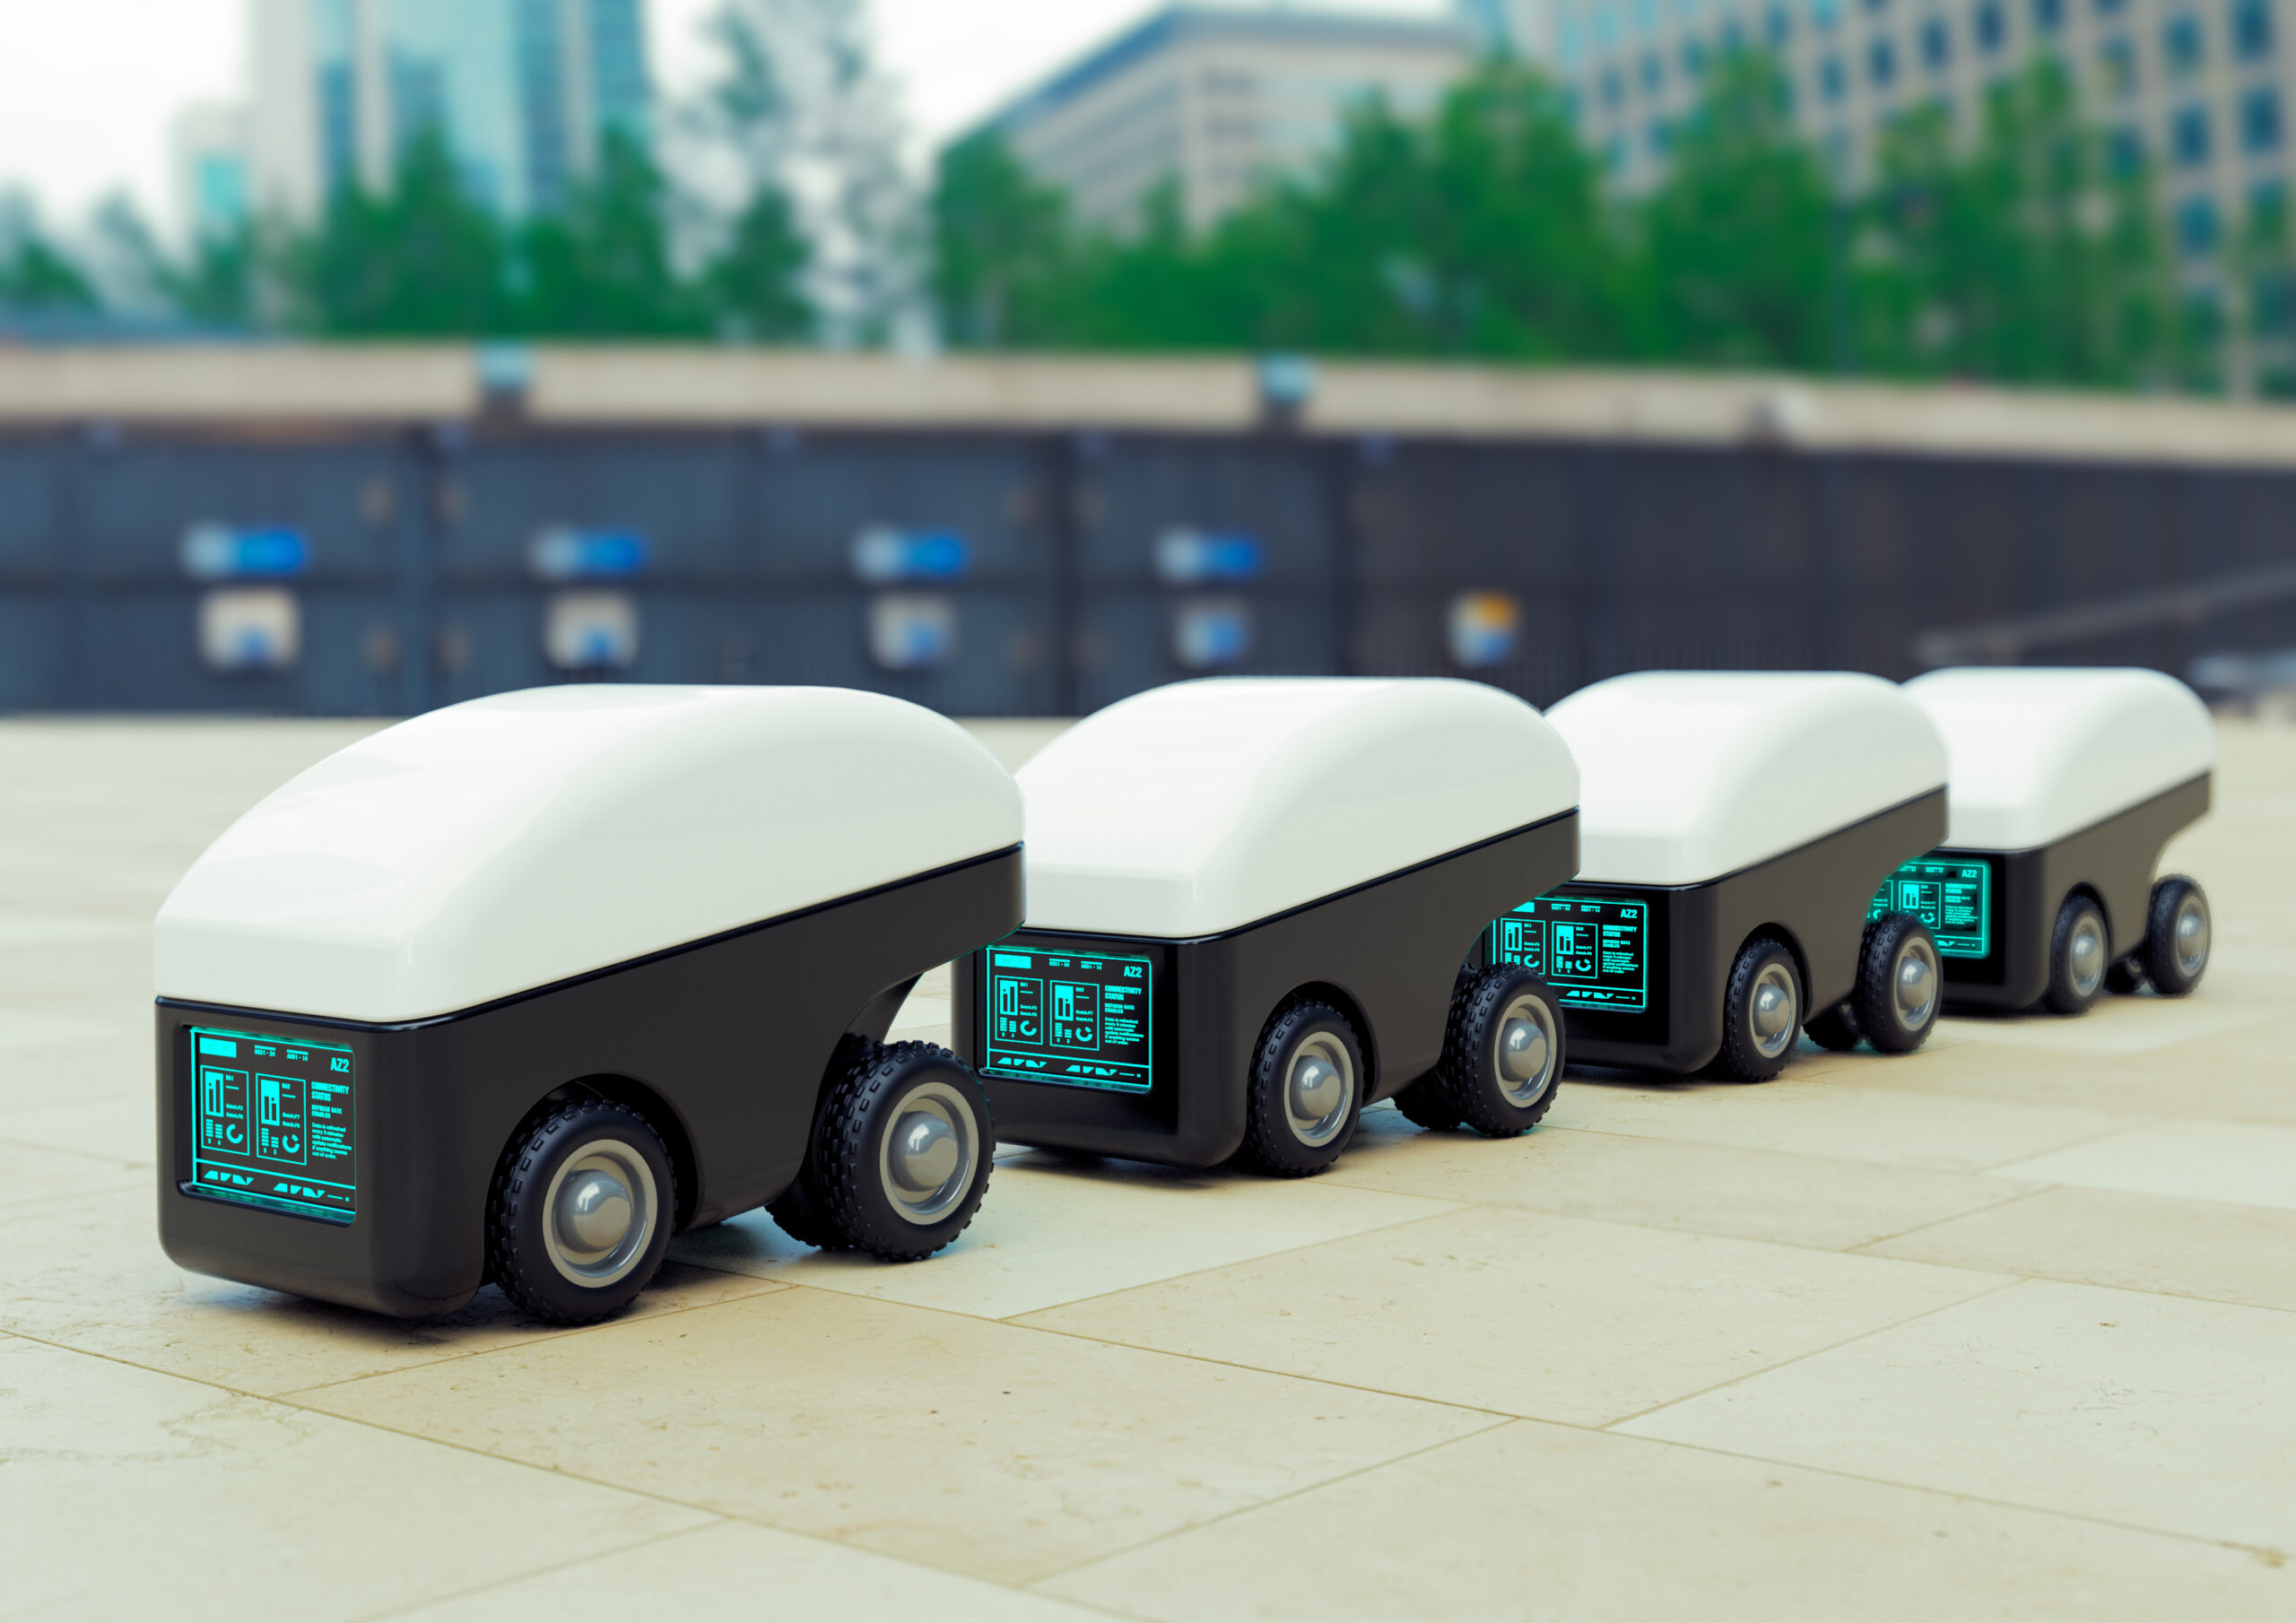 delivery robot car fleet, intelligent automaton vehicle for the